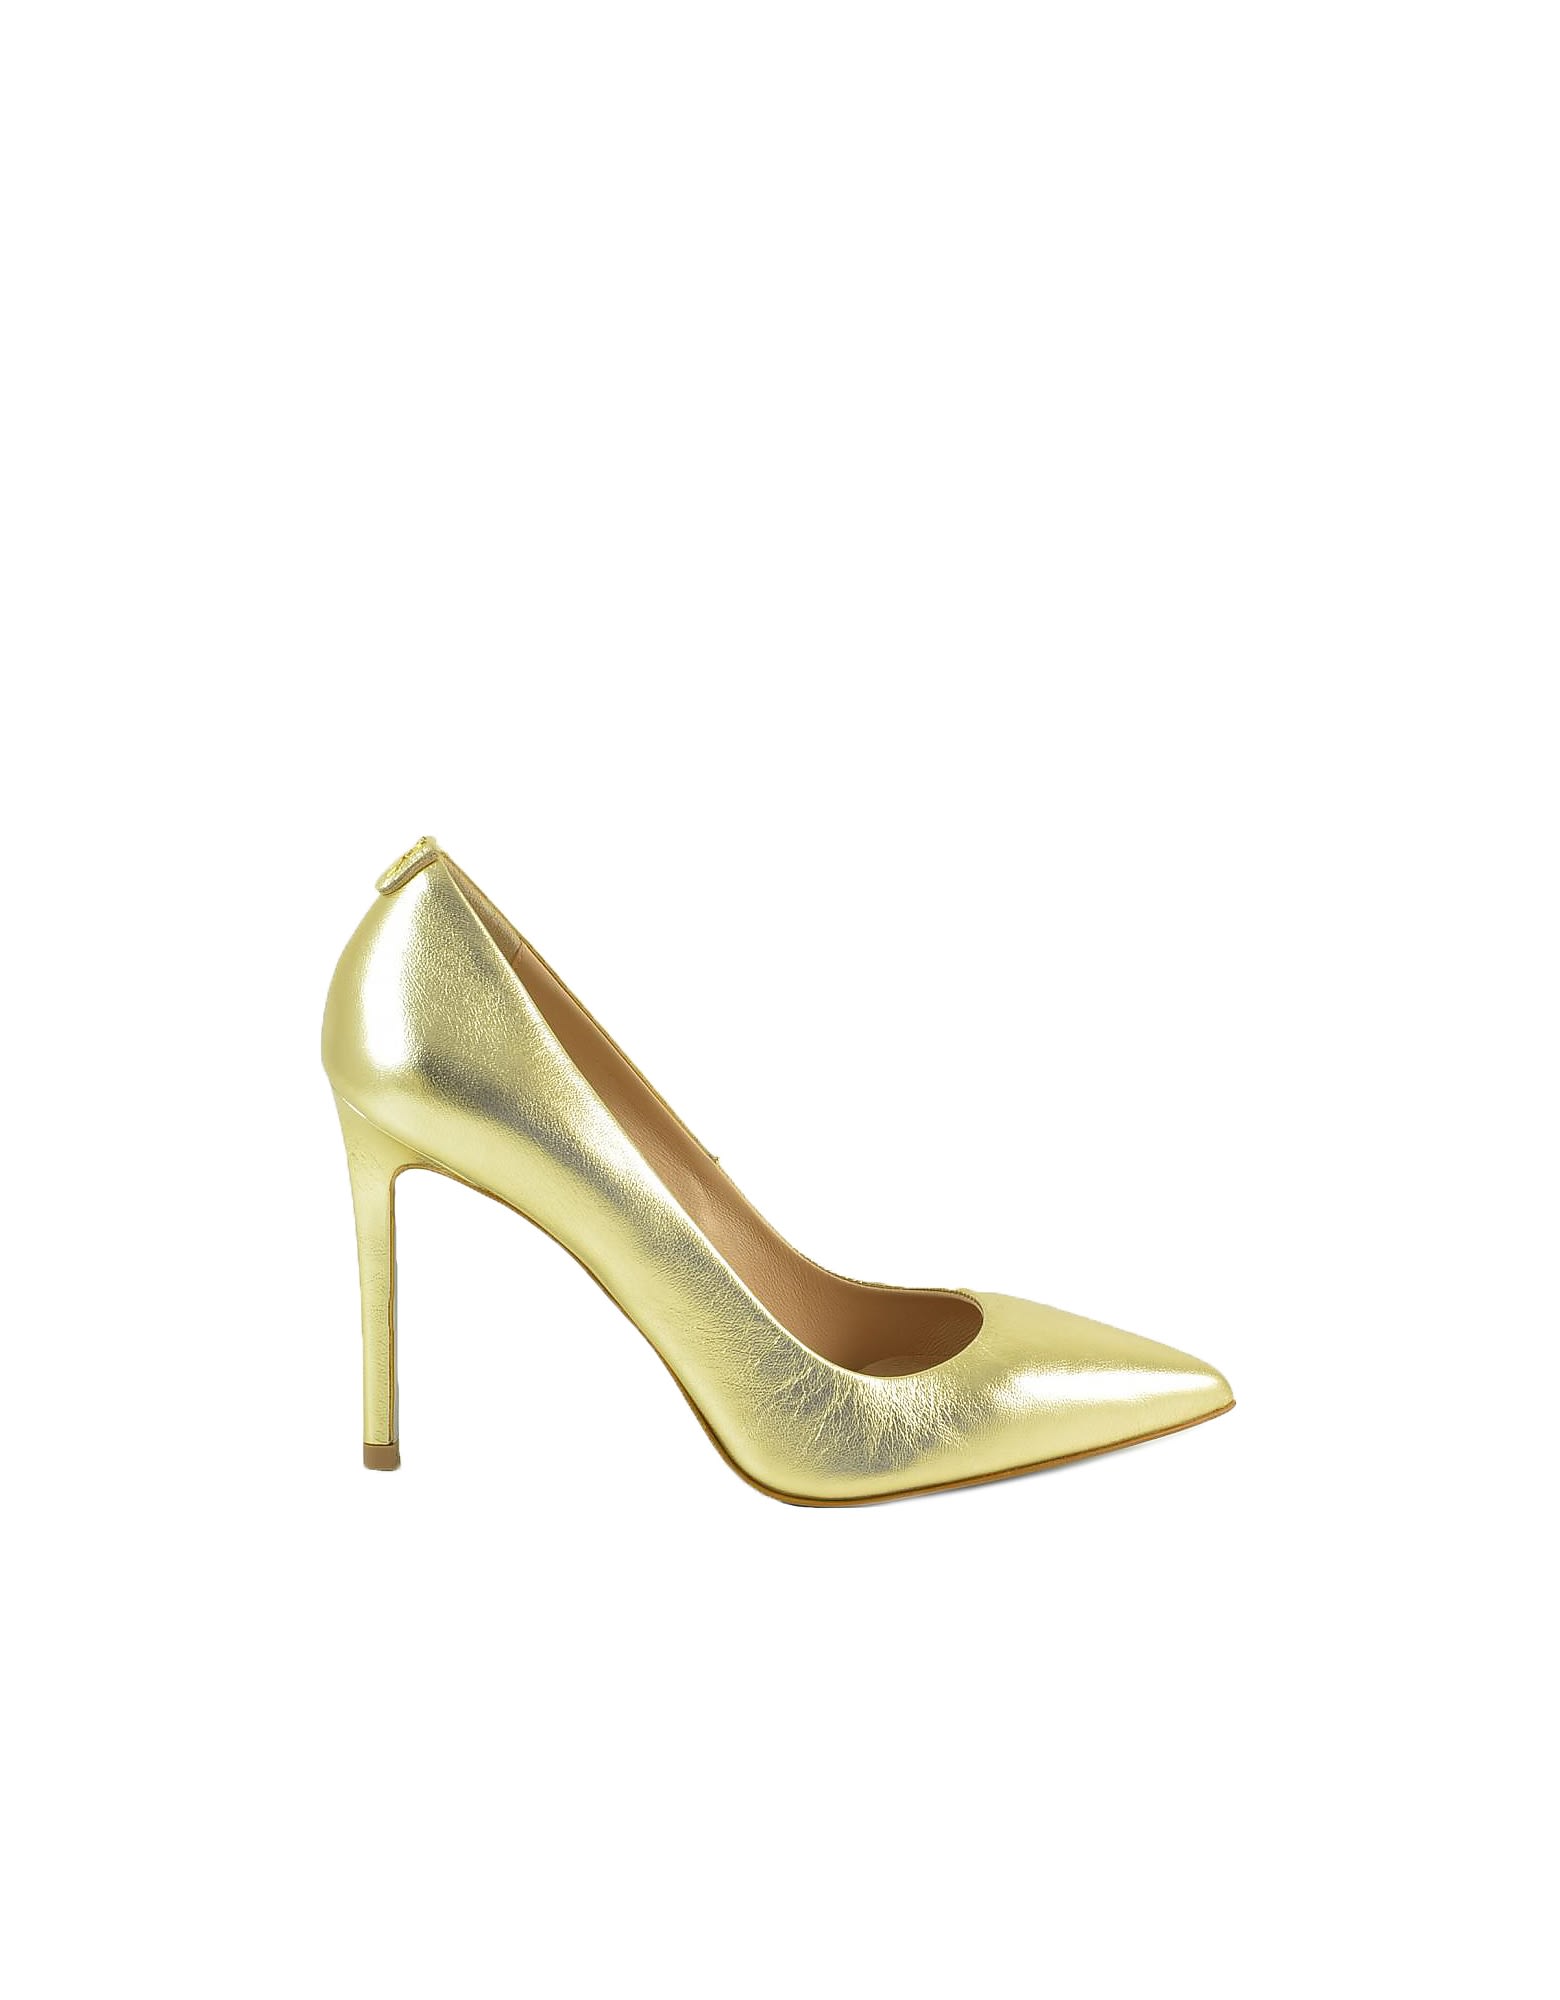 PATRIZIA PEPE GOLD LAMINATED LEATHER PUMPS,PPESCADAAD1ST0544264/35 36-women